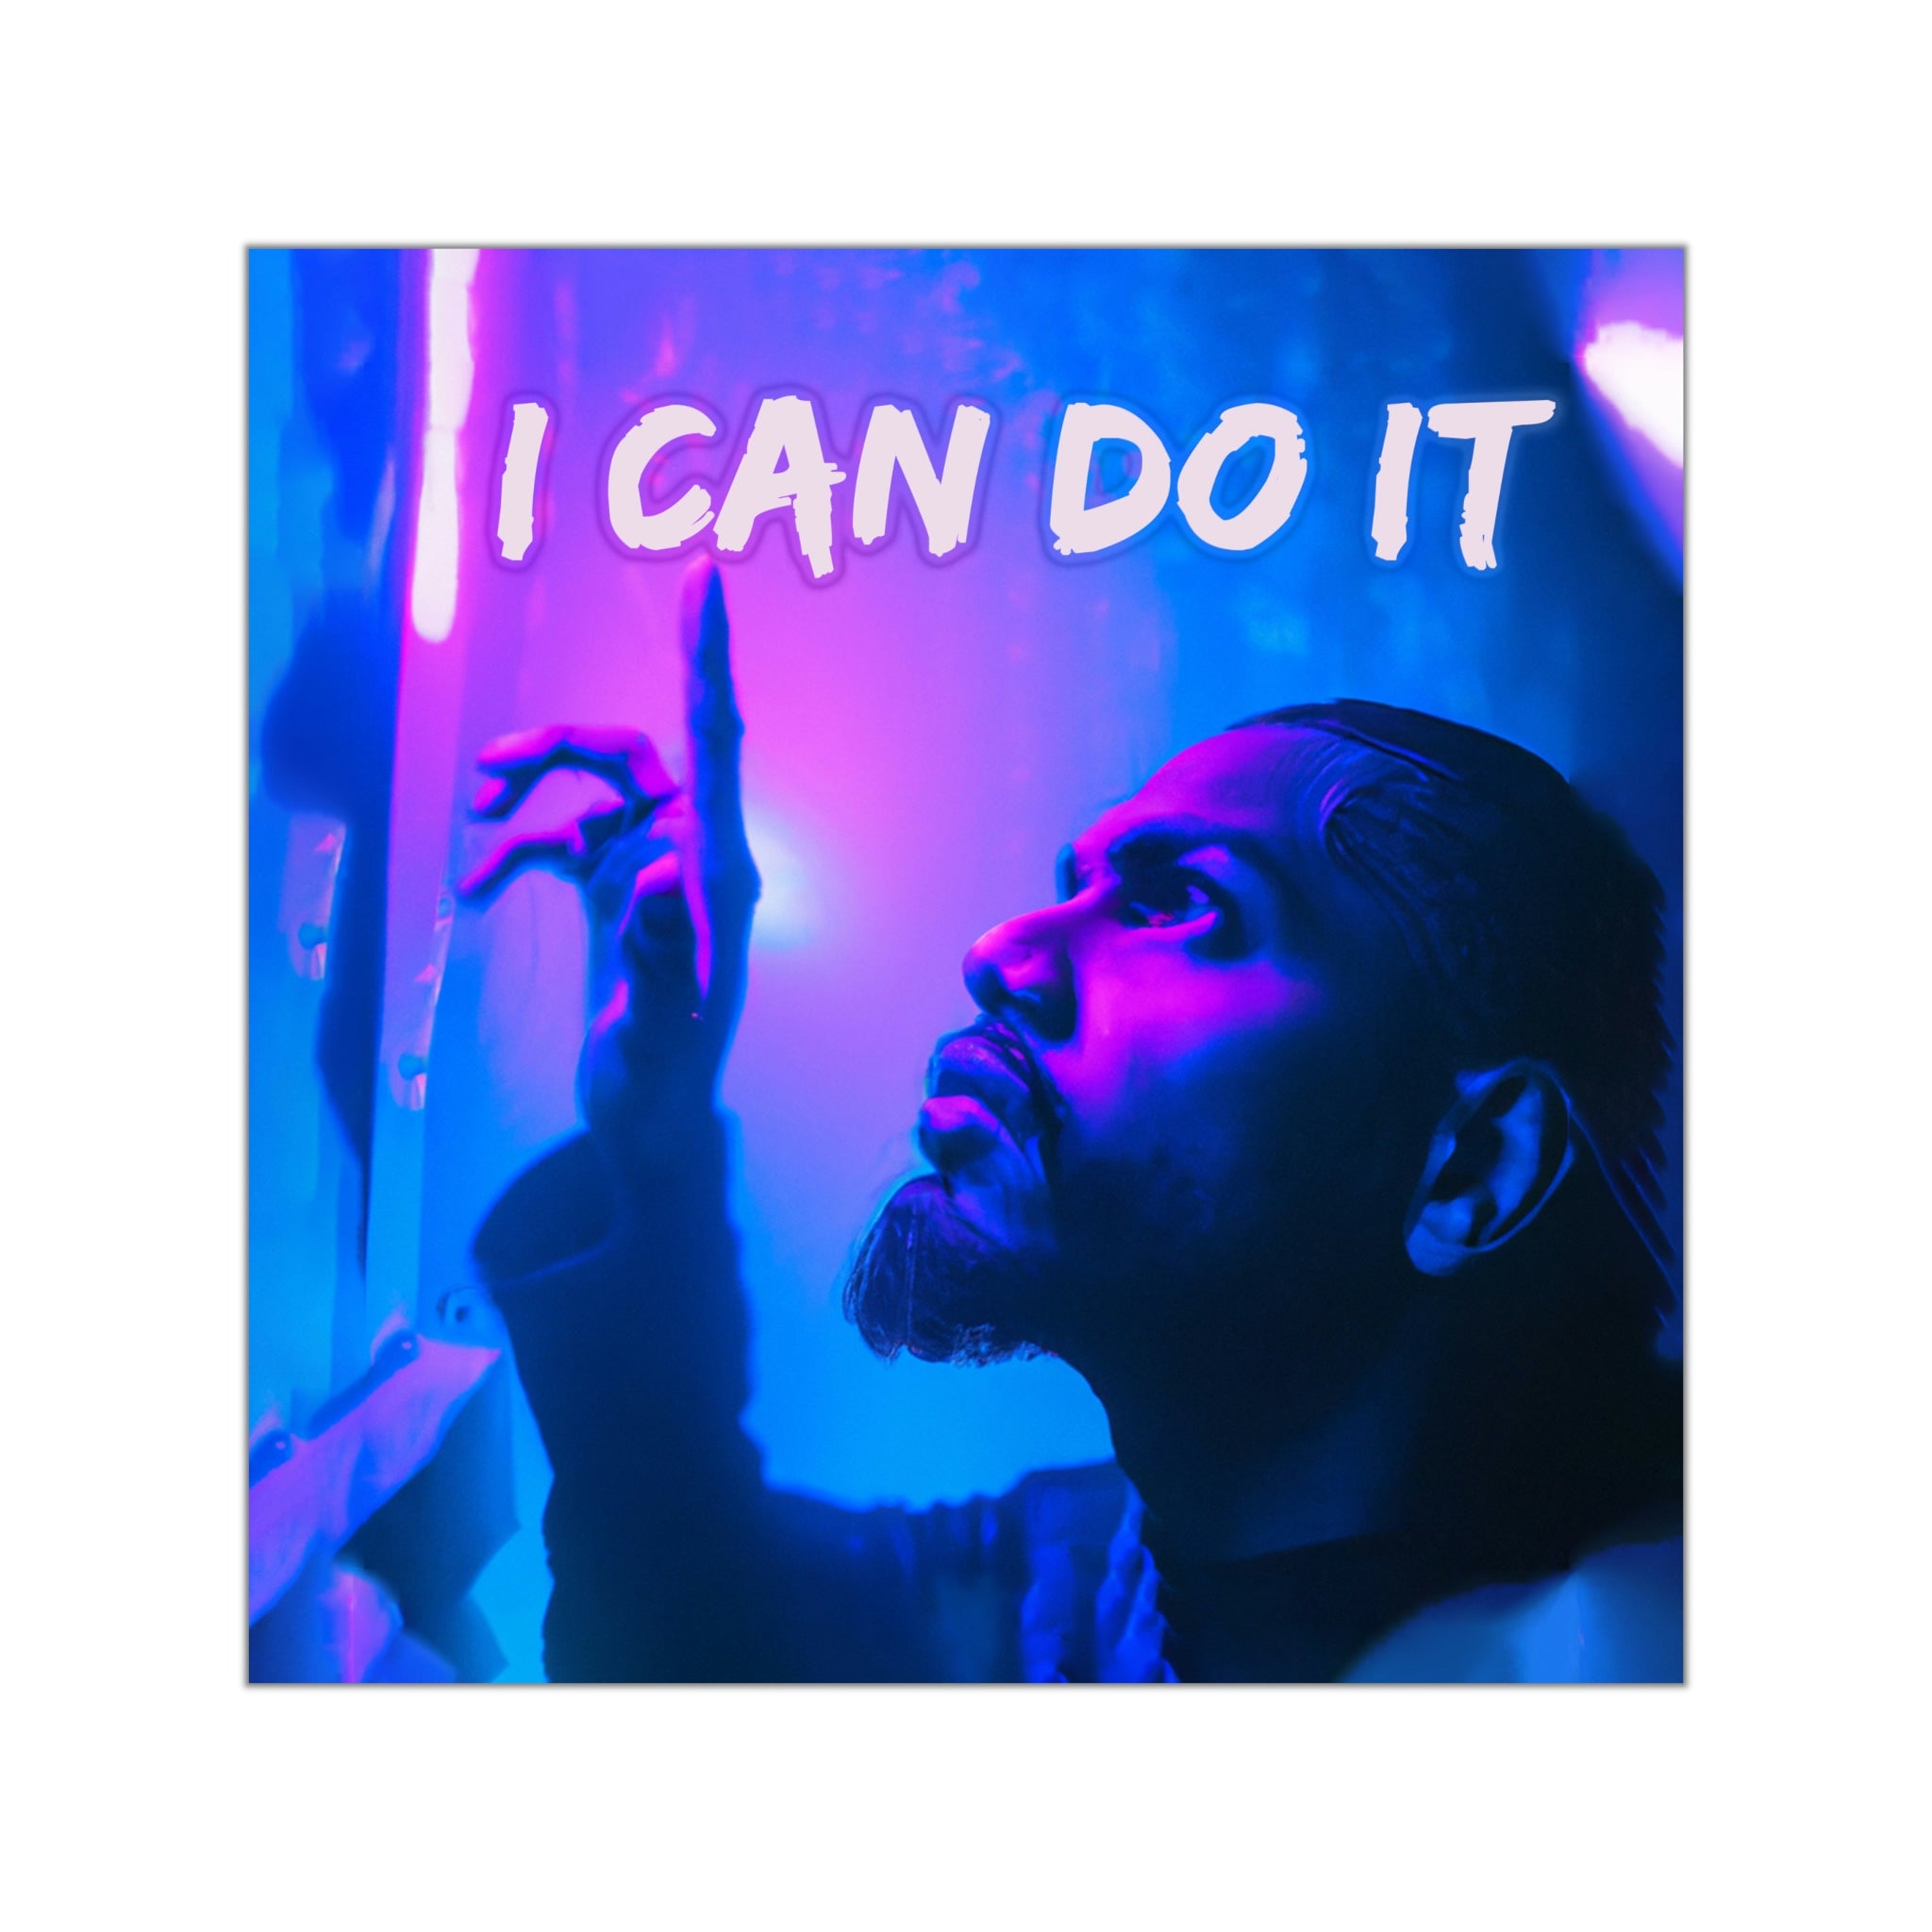 Reach Your Goals with Cinematic Square Vinyl Sticker: "I Can Do It" #size_8x8-inches